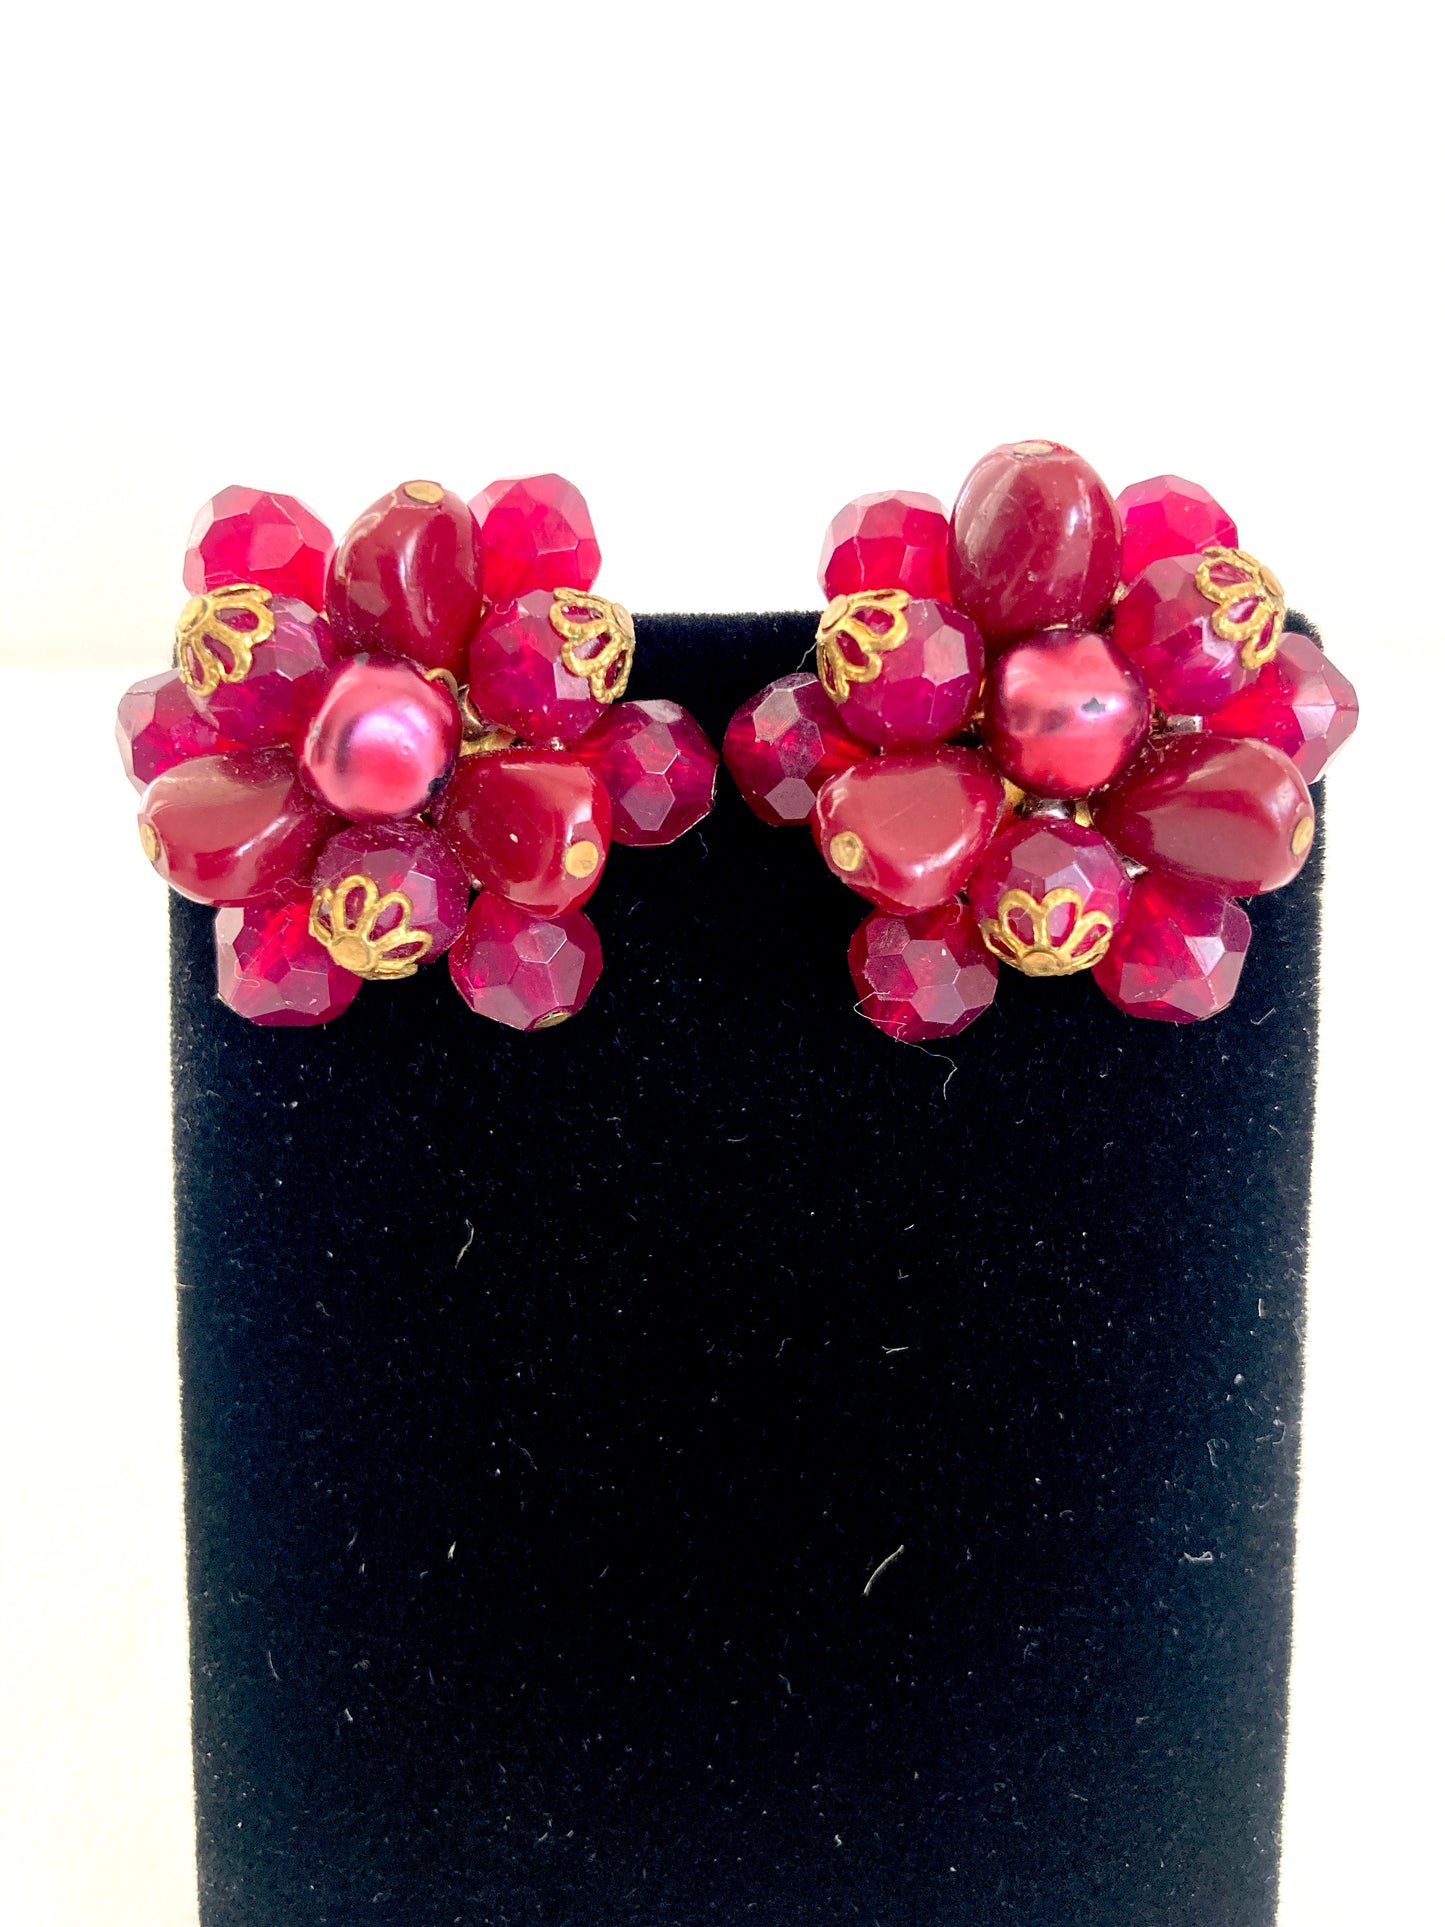 Vintage Cluster Earrings Pomegranate Red Clip Ons